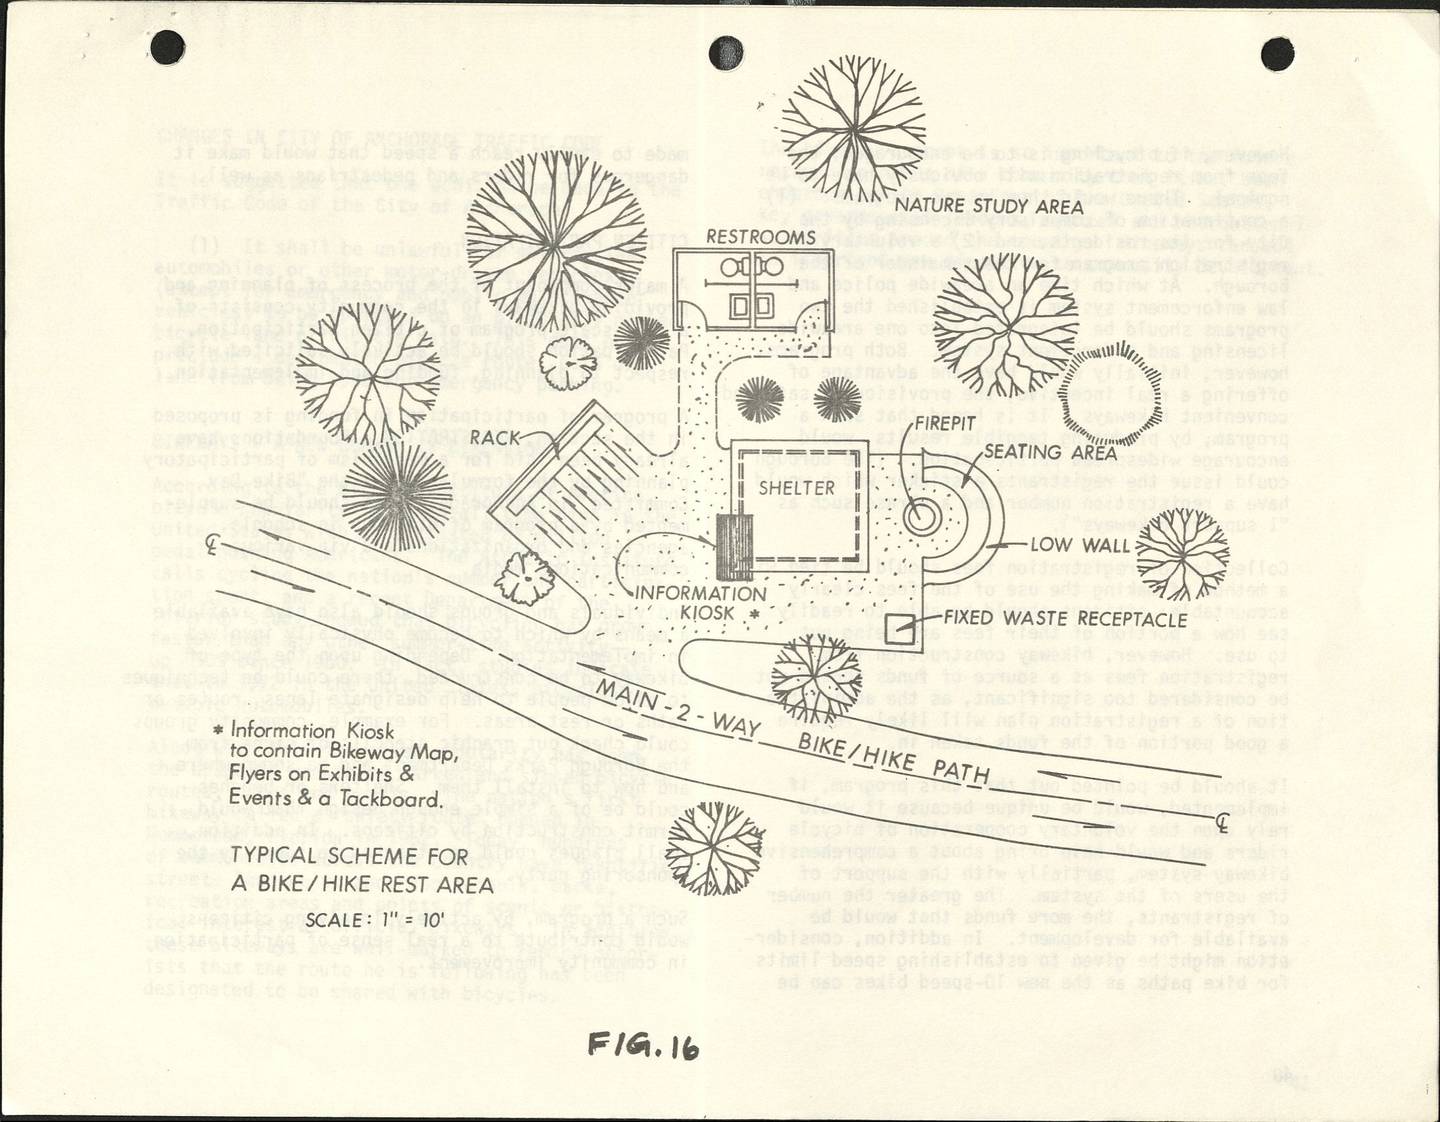 A 1973 plan for a bikeway and related trail system in Anchorage